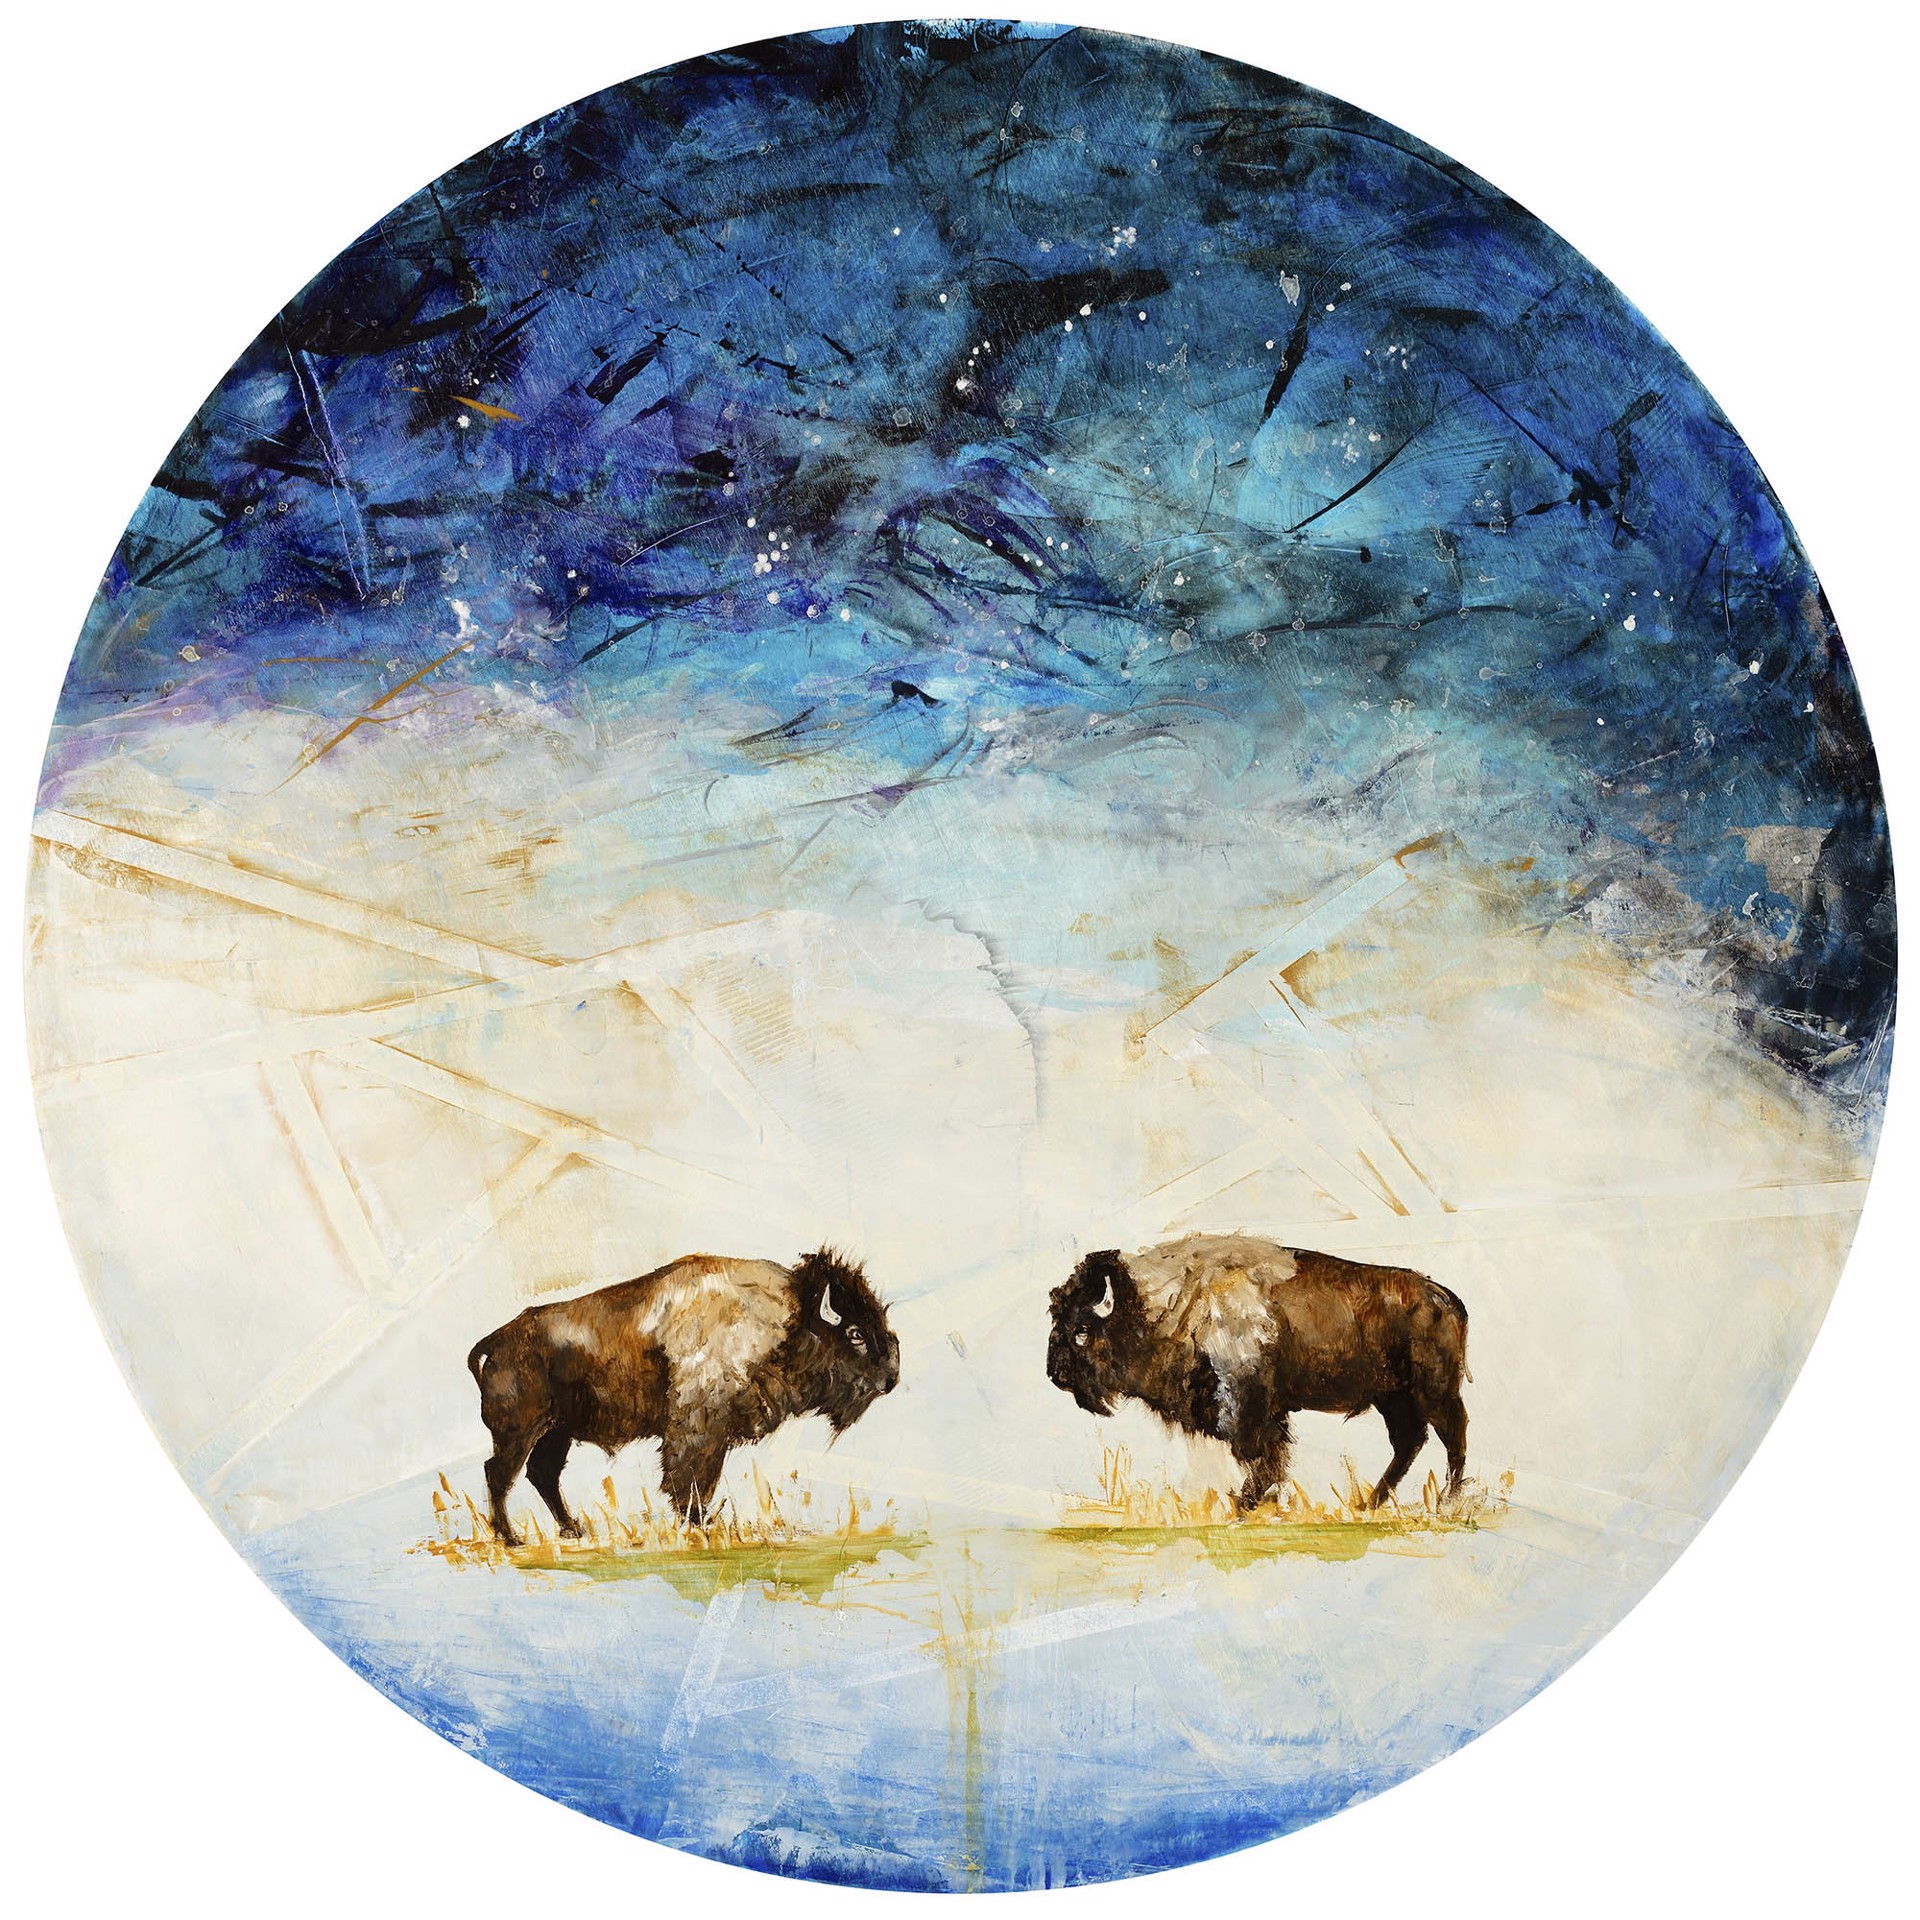 Contemporary Oil Painting On Round Panel Of Two Bison With An Abstract Blue White And Yellow Background, Fine Art By Jenna Von Benedikt, Available At Gallery Wild